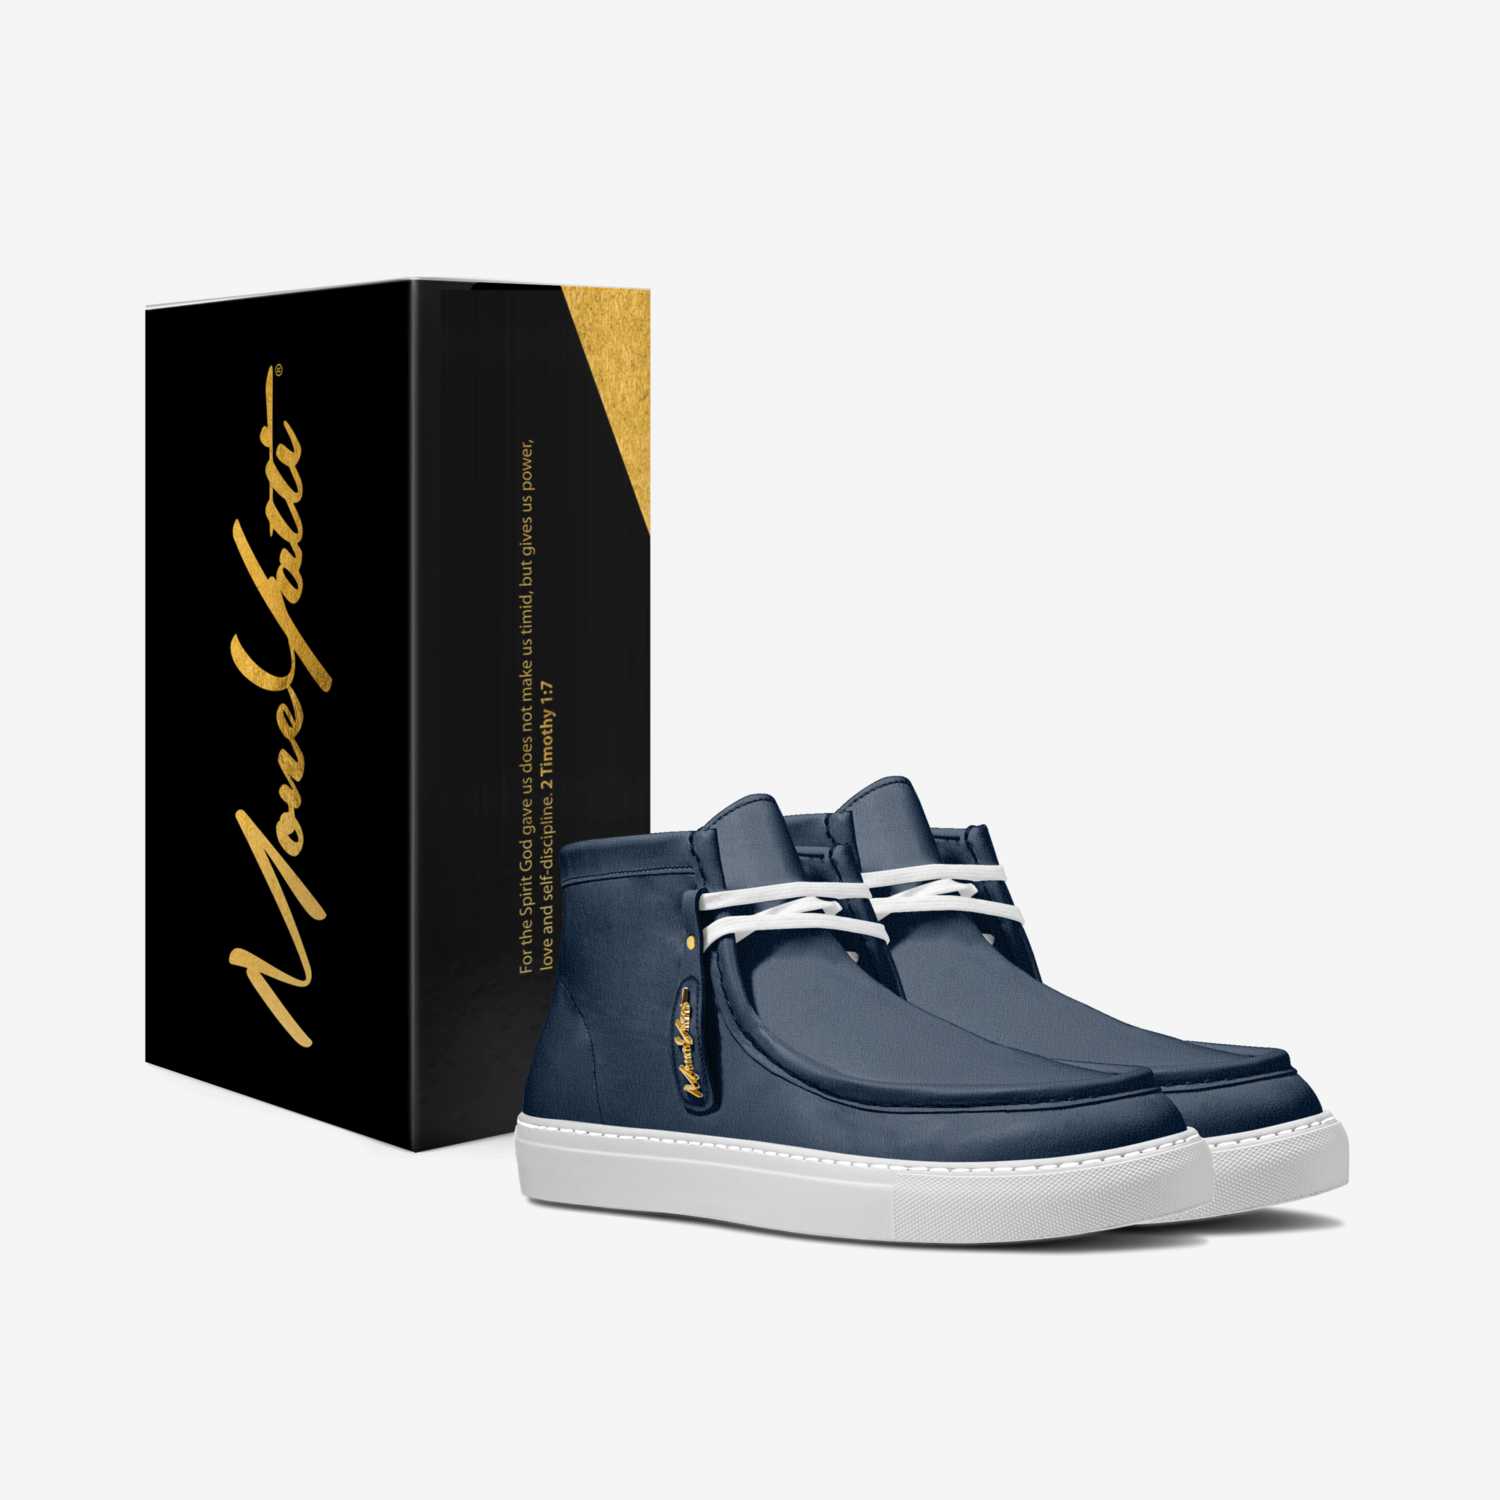 LUX SUEDE 012 custom made in Italy shoes by Moneyatti Brand | Box view